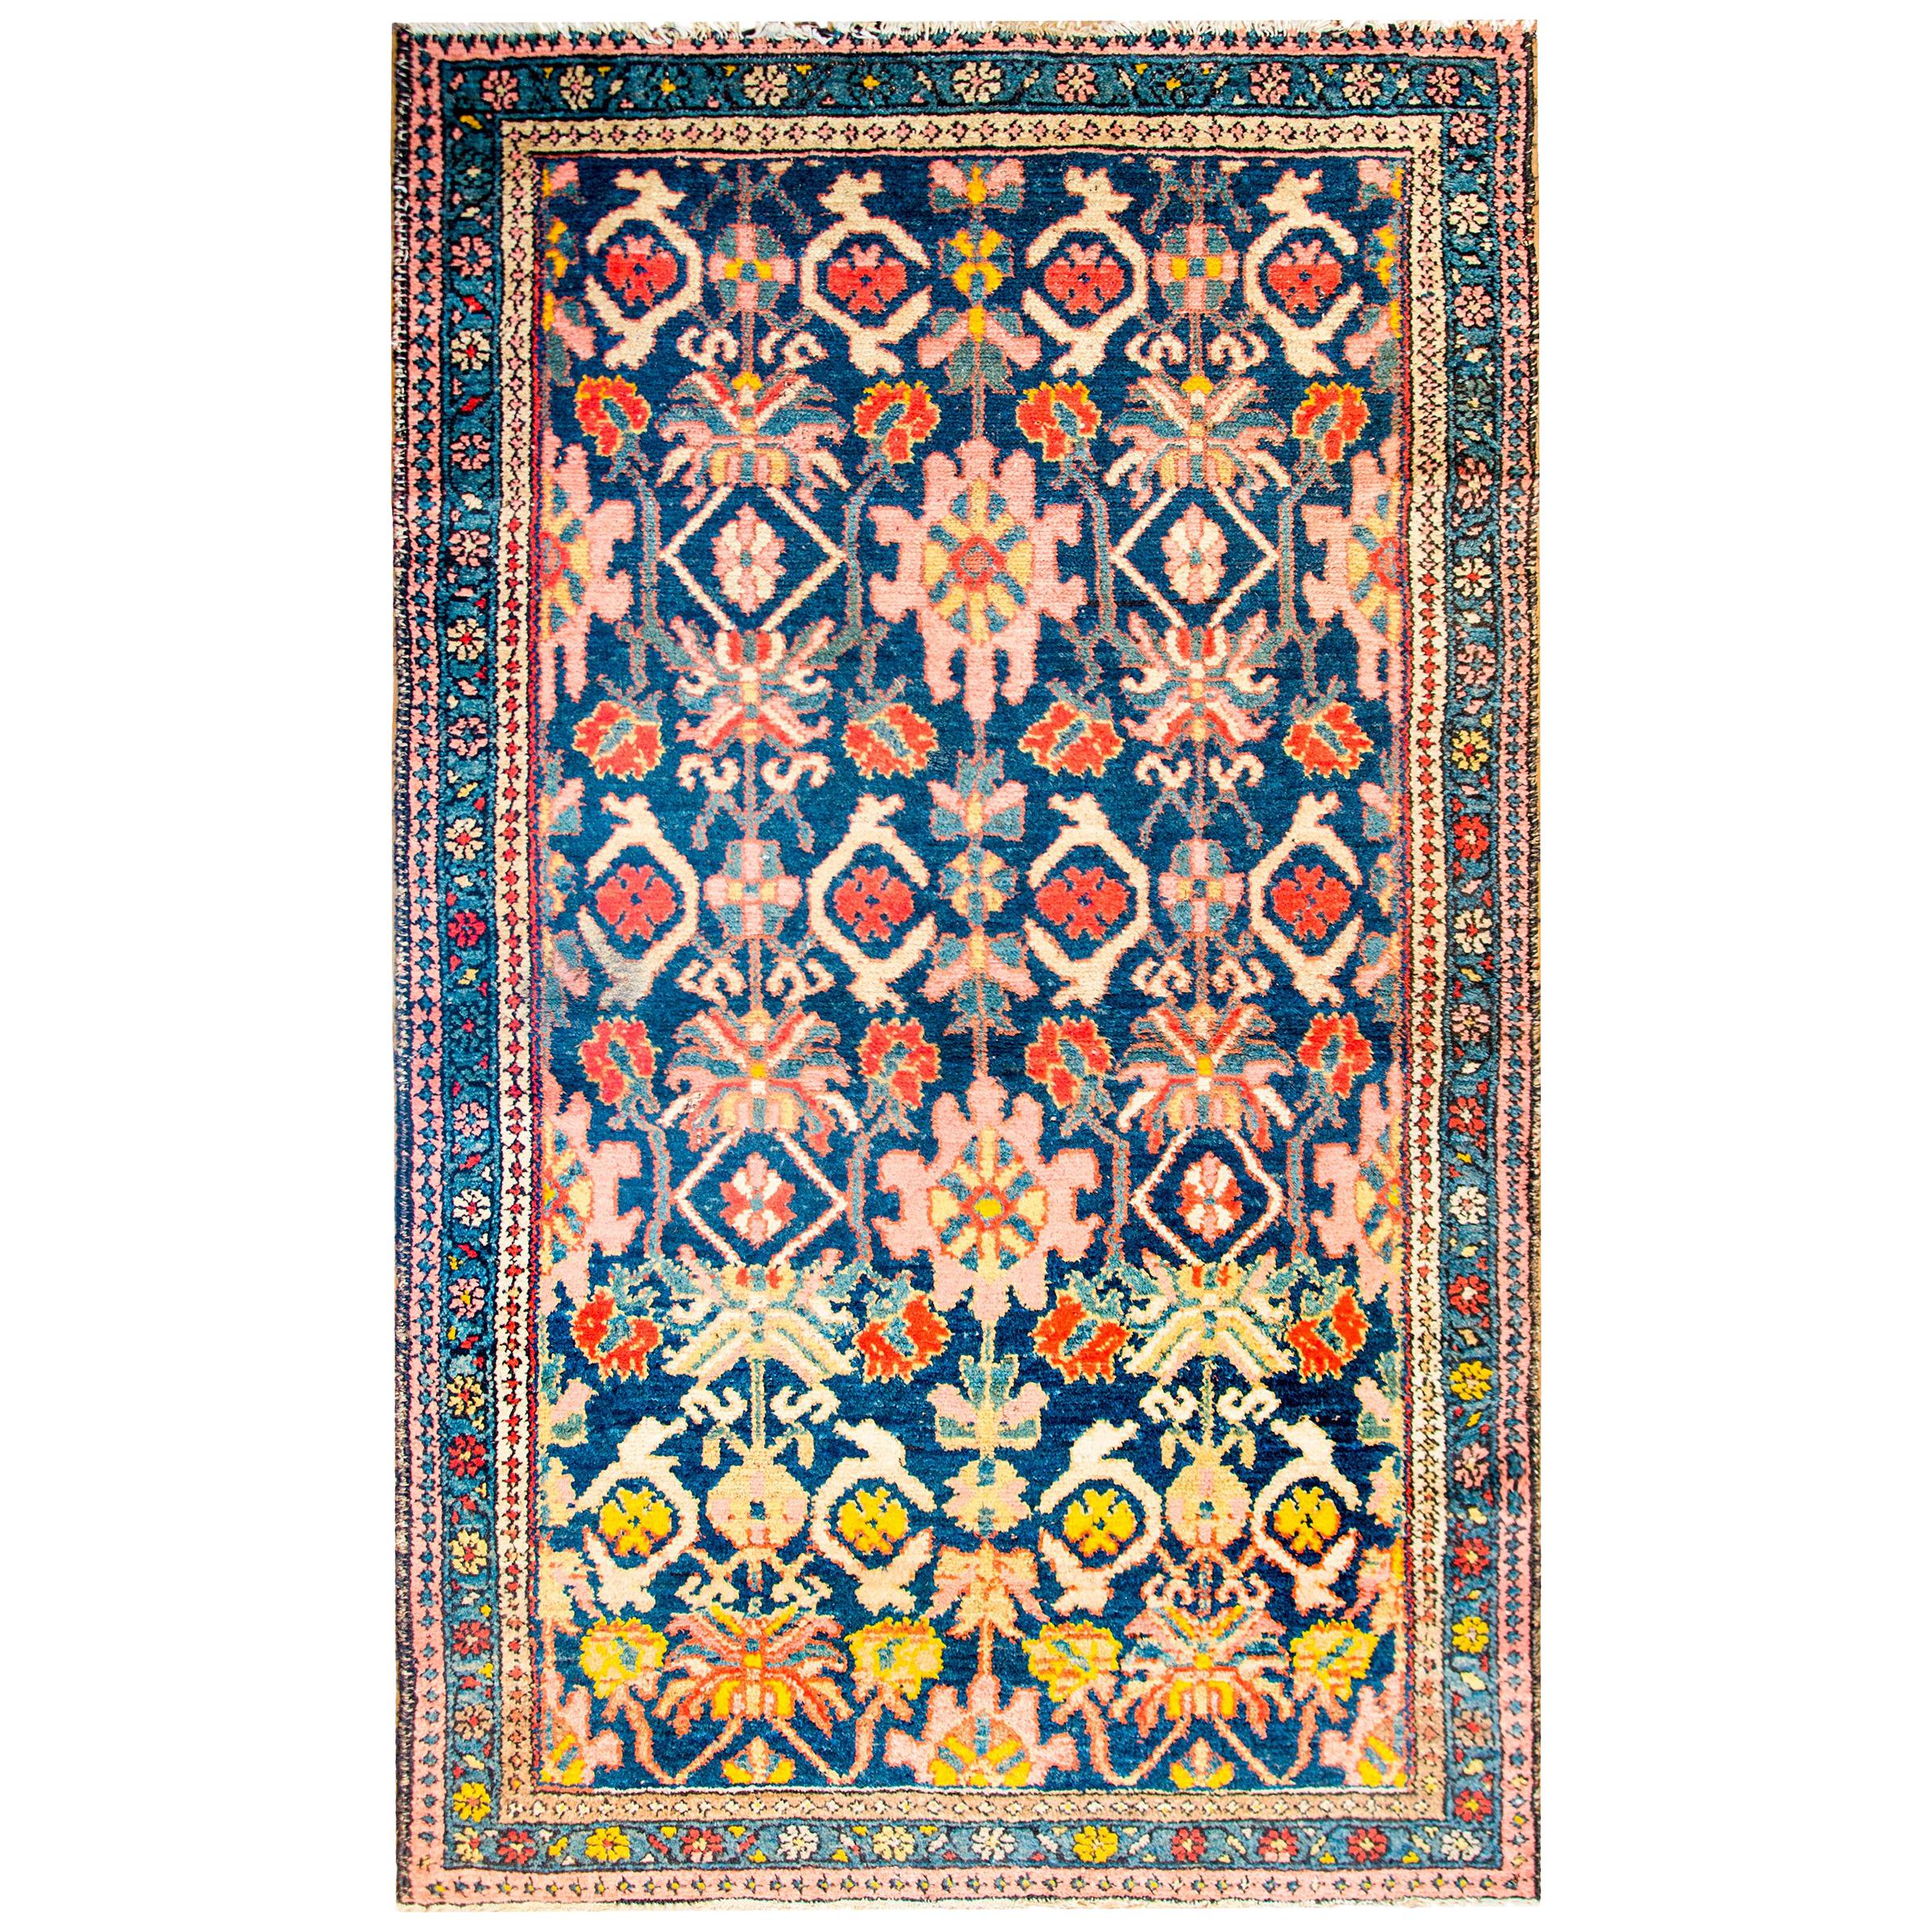 Amazing Early 20th Century Antique Malayer Rug